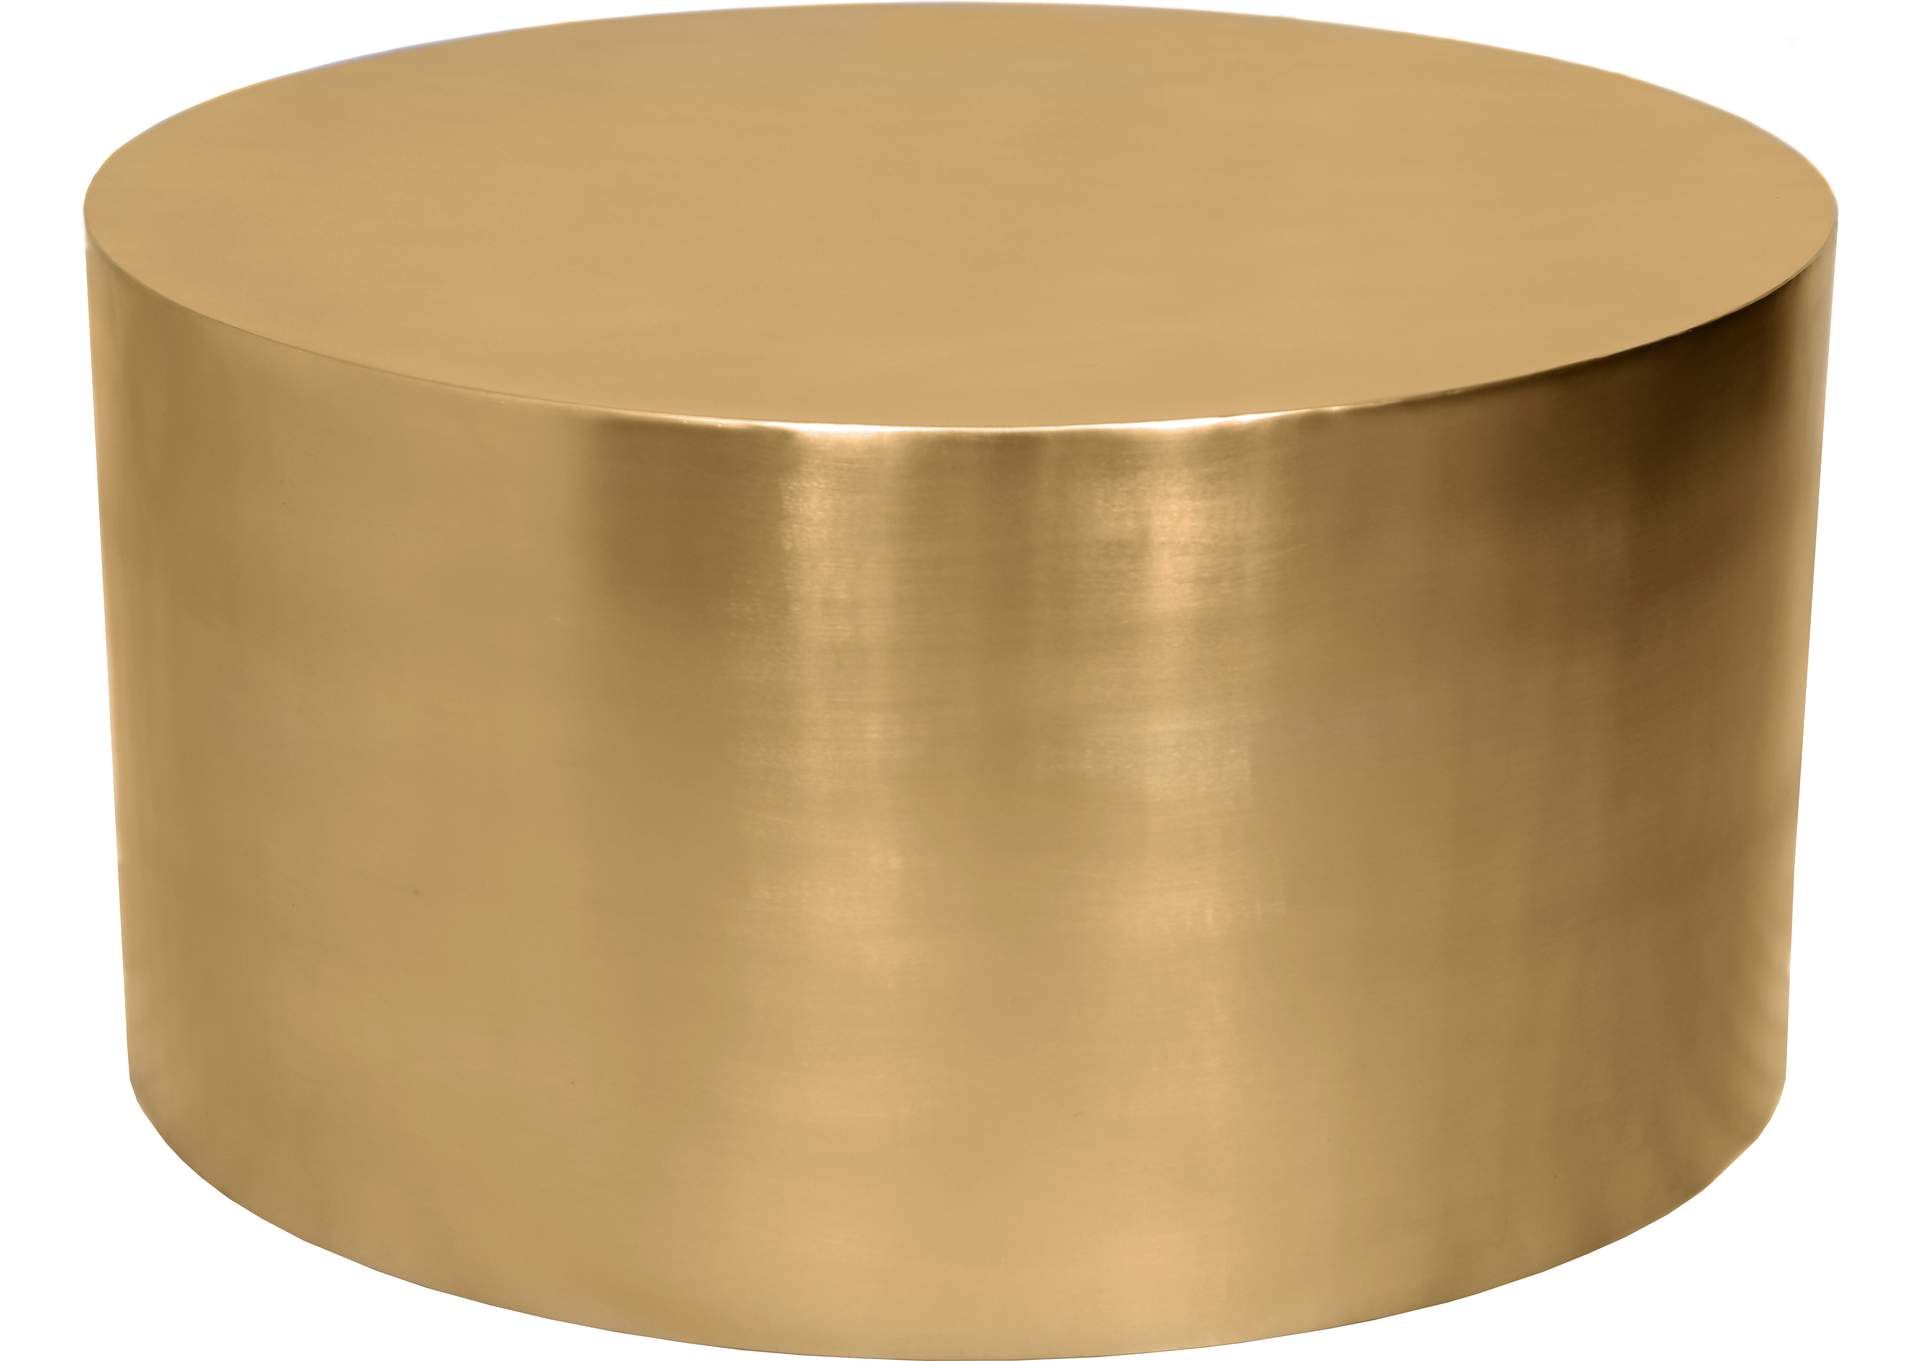 Cylinder Brushed Gold Coffee Table Best Buy Furniture And Mattress Within Satin Gold Coffee Tables (View 6 of 20)